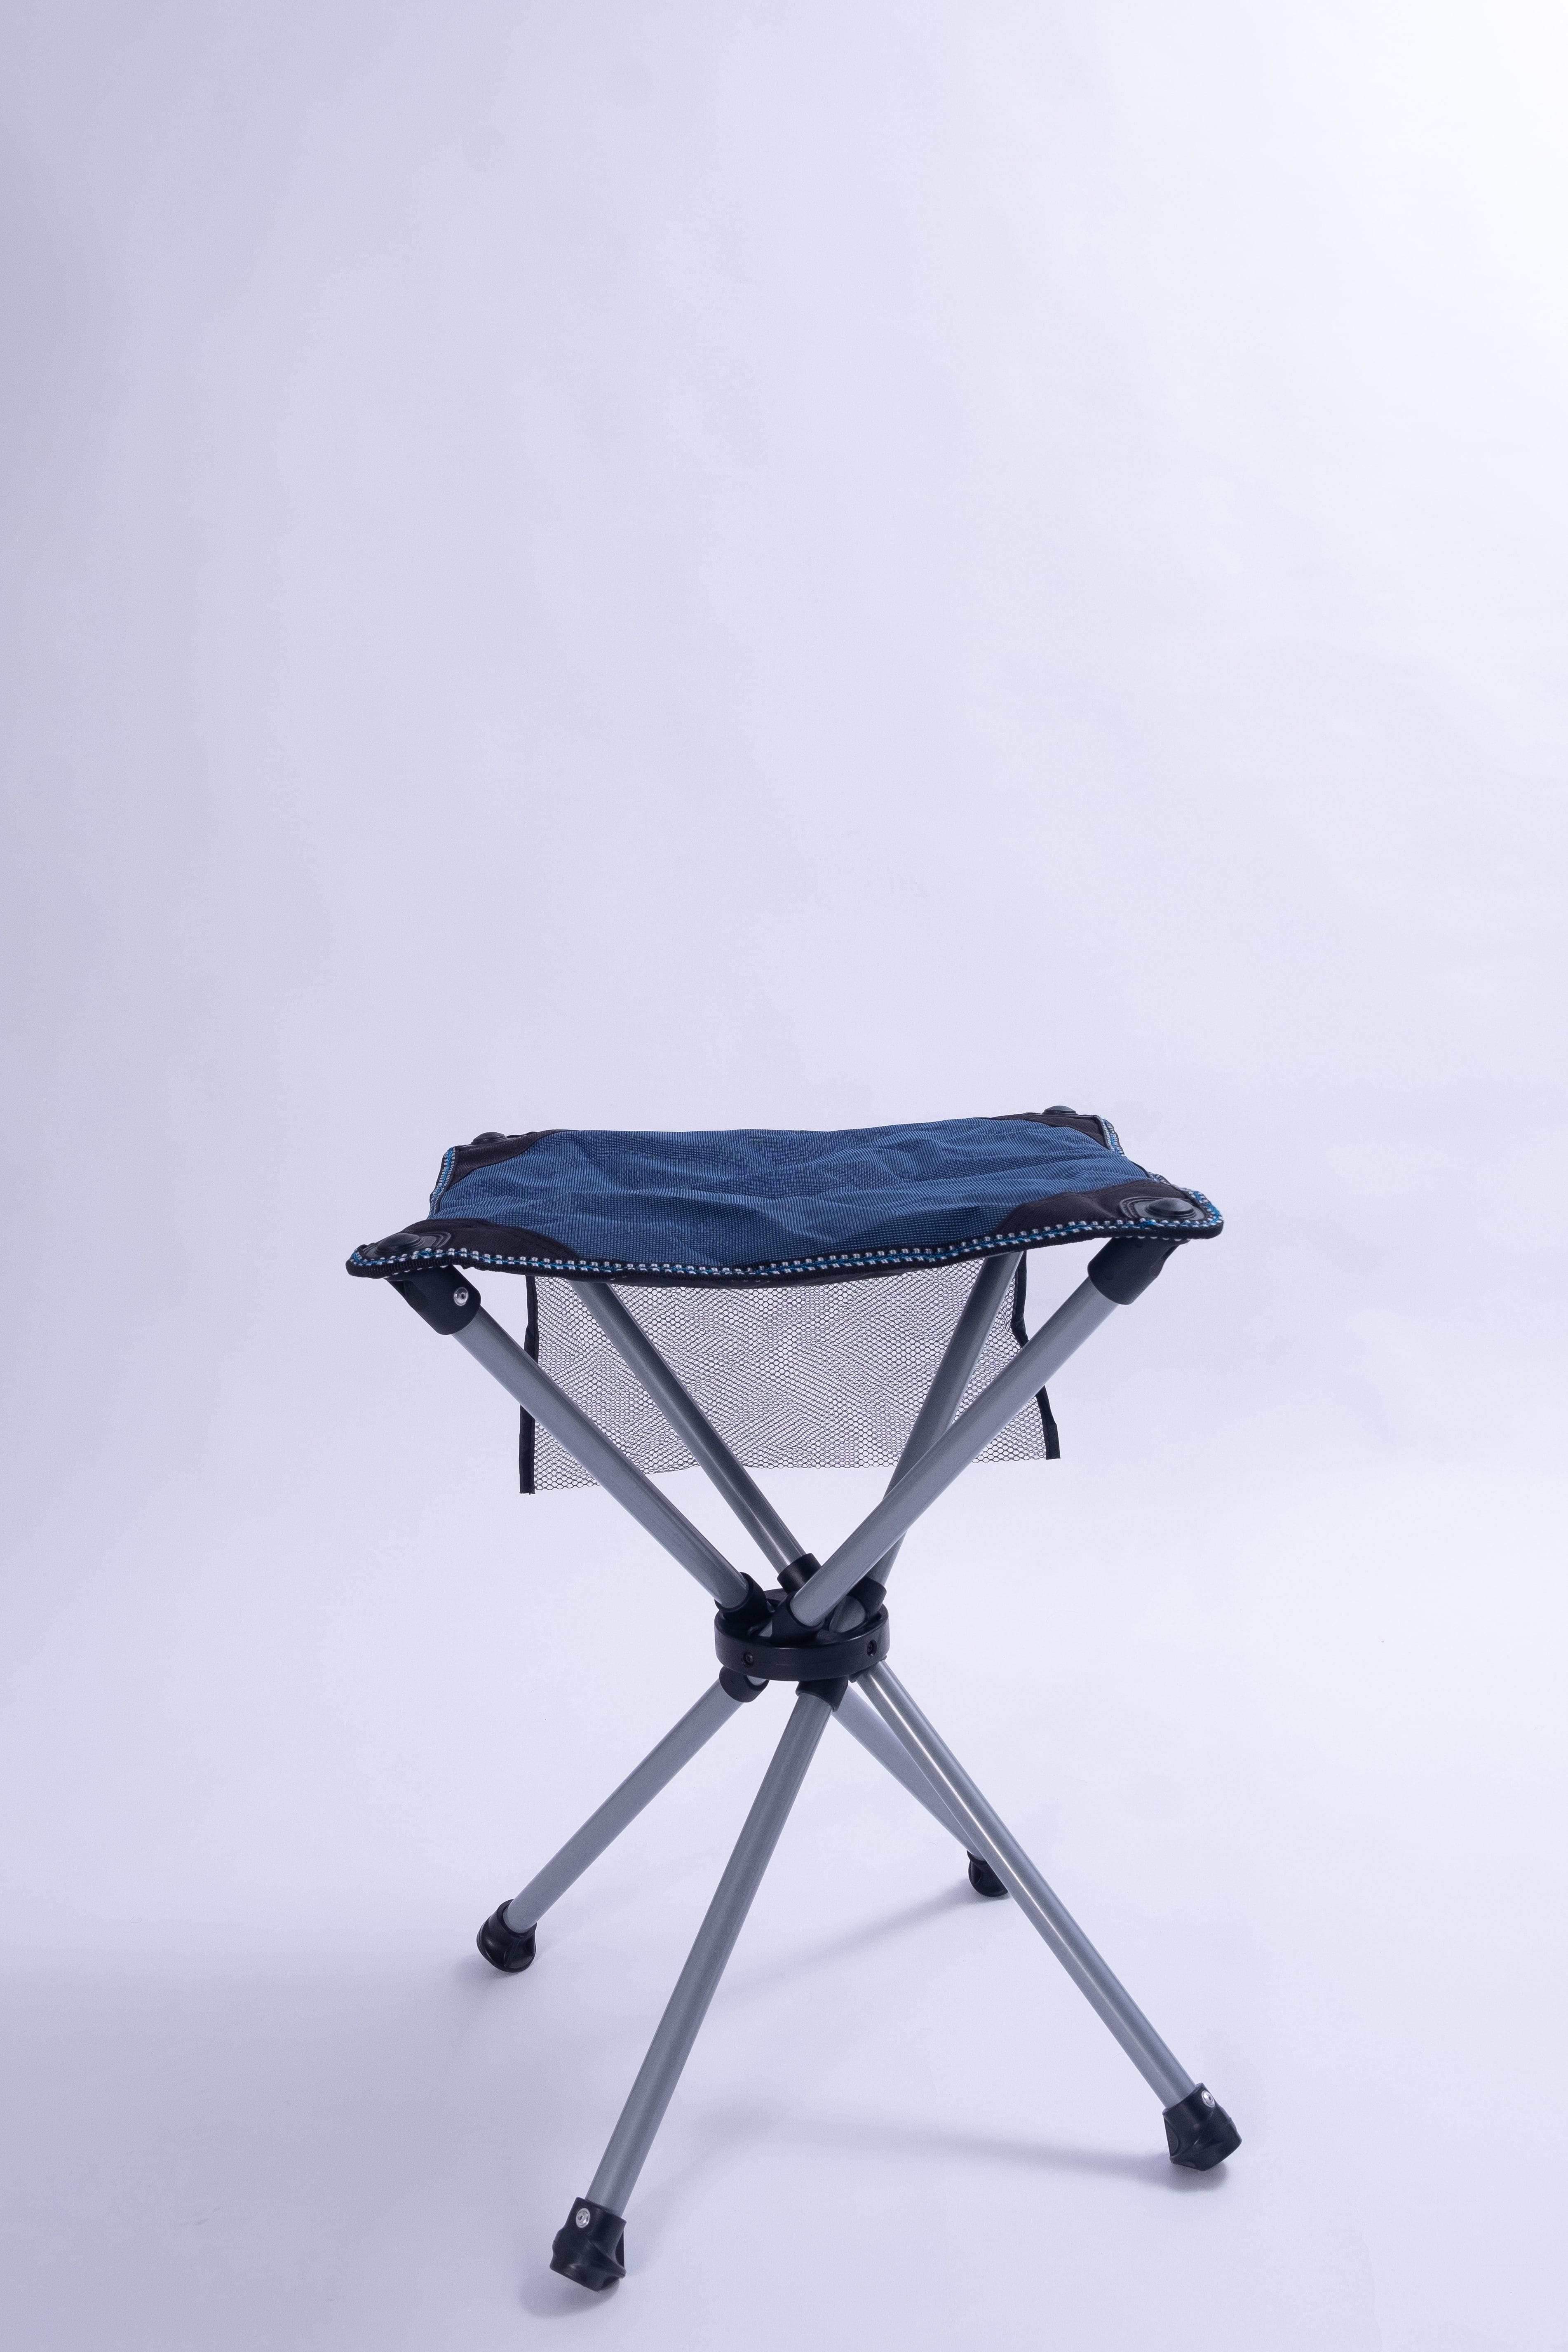 FreeCamp Gizmo Folding Camping Chair | Lightweight & Portable | Your Perfect Outdoor Companion